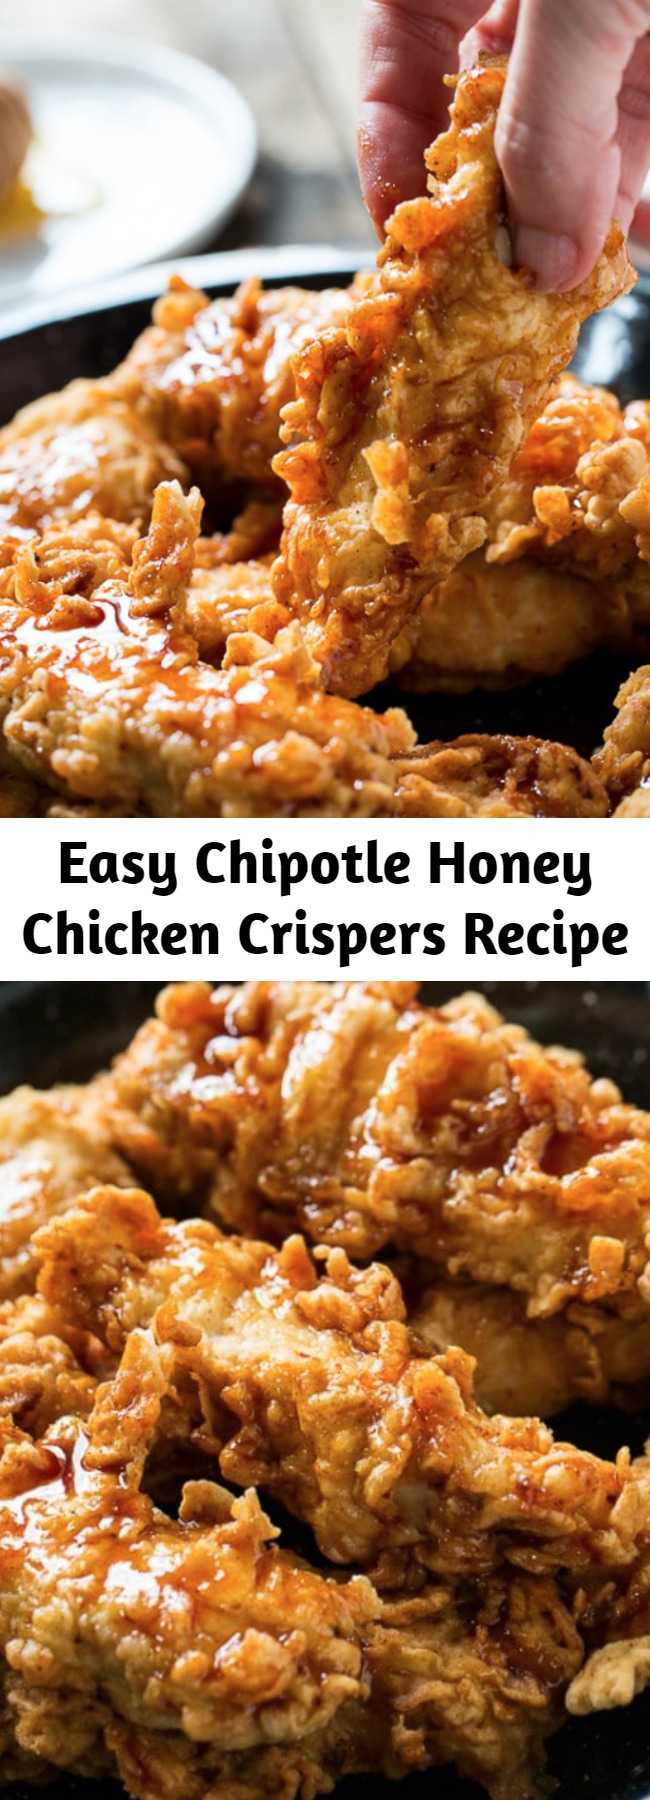 Easy Chipotle Honey Chicken Crispers Recipe - These Honey Chipotle Chicken Crispers are a Chili's copycat. Crispy fried chicken tenders coated in a sweet and spicy sauce.